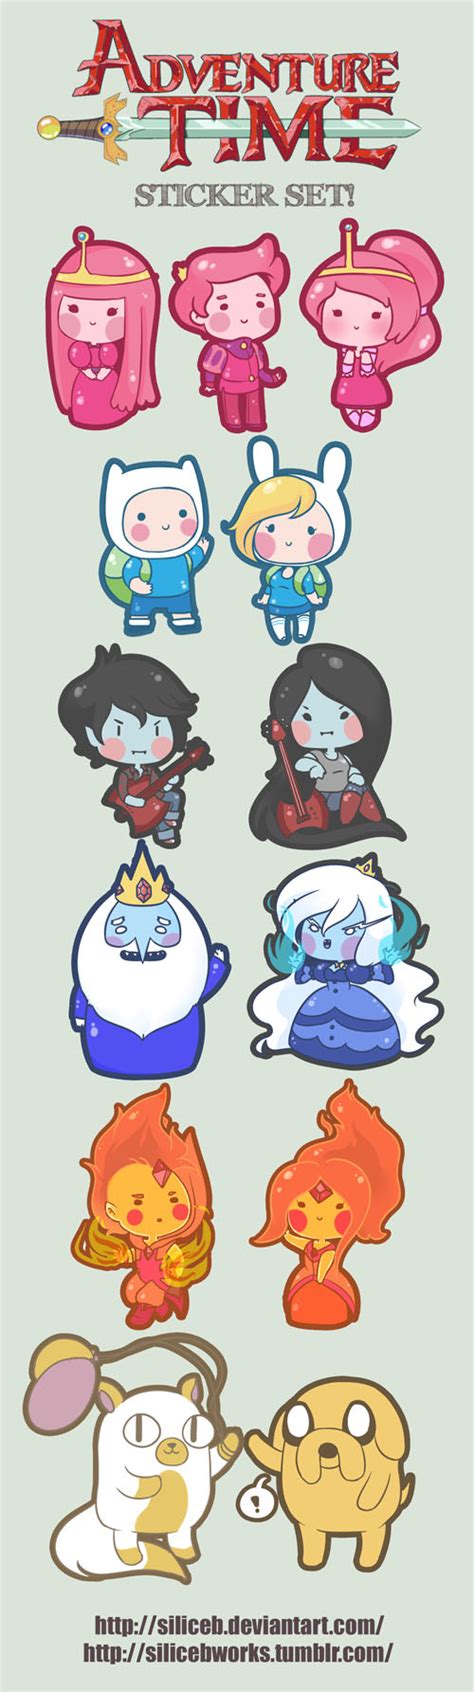 Adventure Time Chibis By Siliceb On Deviantart